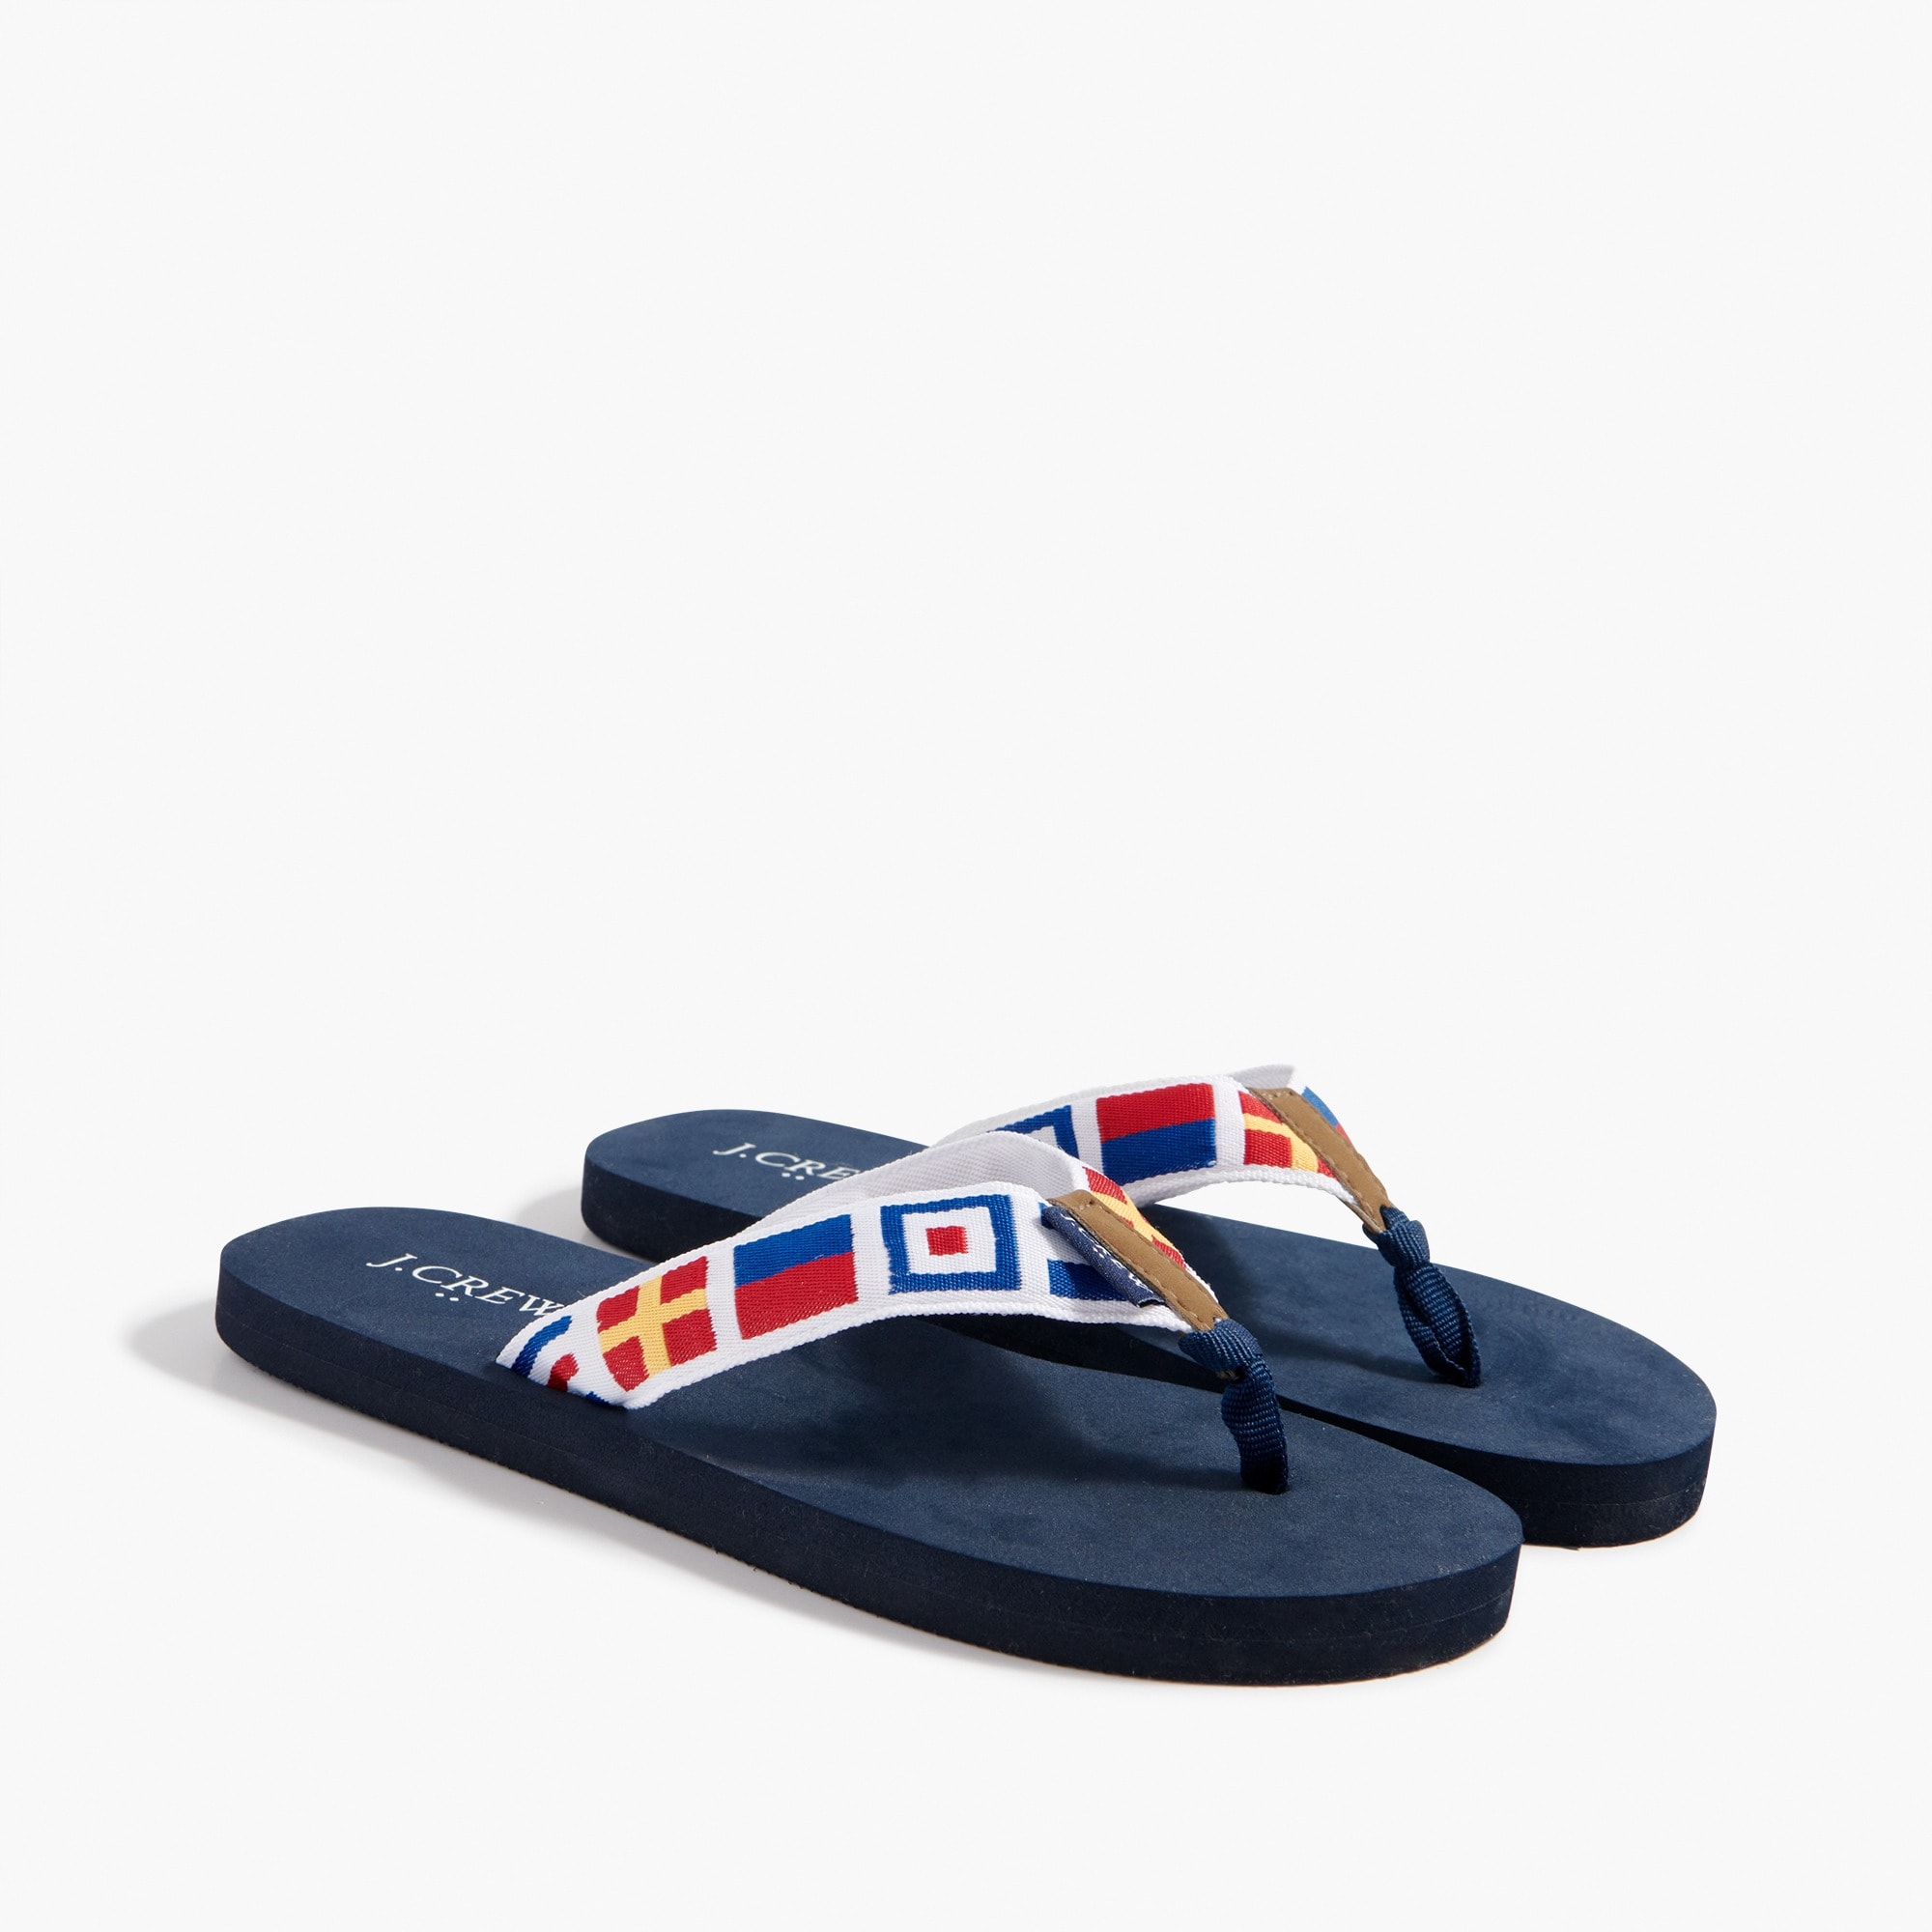 havaianas for kids